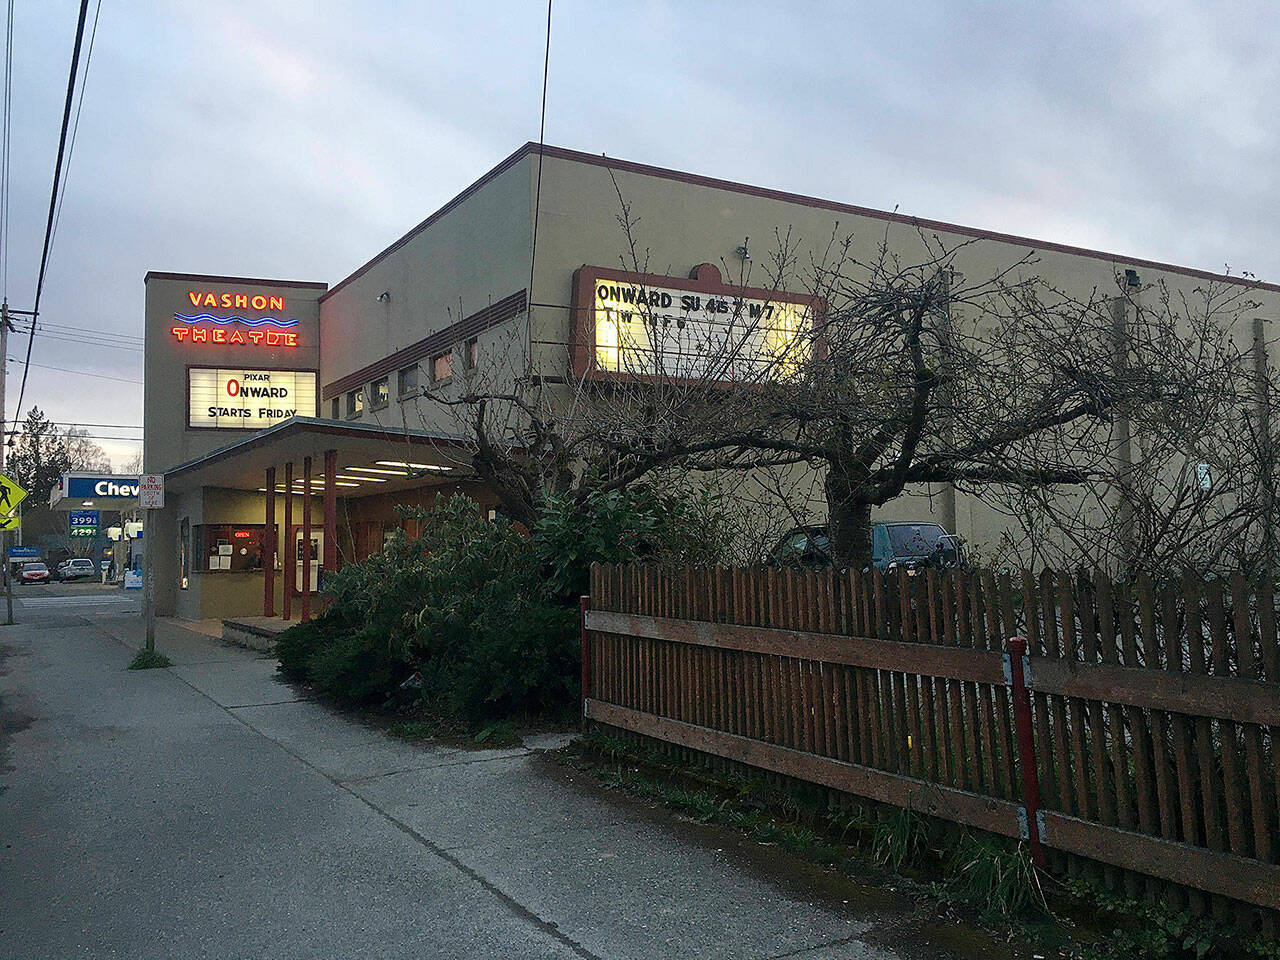 (Photo by Elizabeth Shepherd) On Friday, April 8, Vashon Theatre will be open at 5:30 p.m. to welcome islanders to tour the facility, hear about the theater owners’ plans for their new outdoor plaza, and donate to the cause.